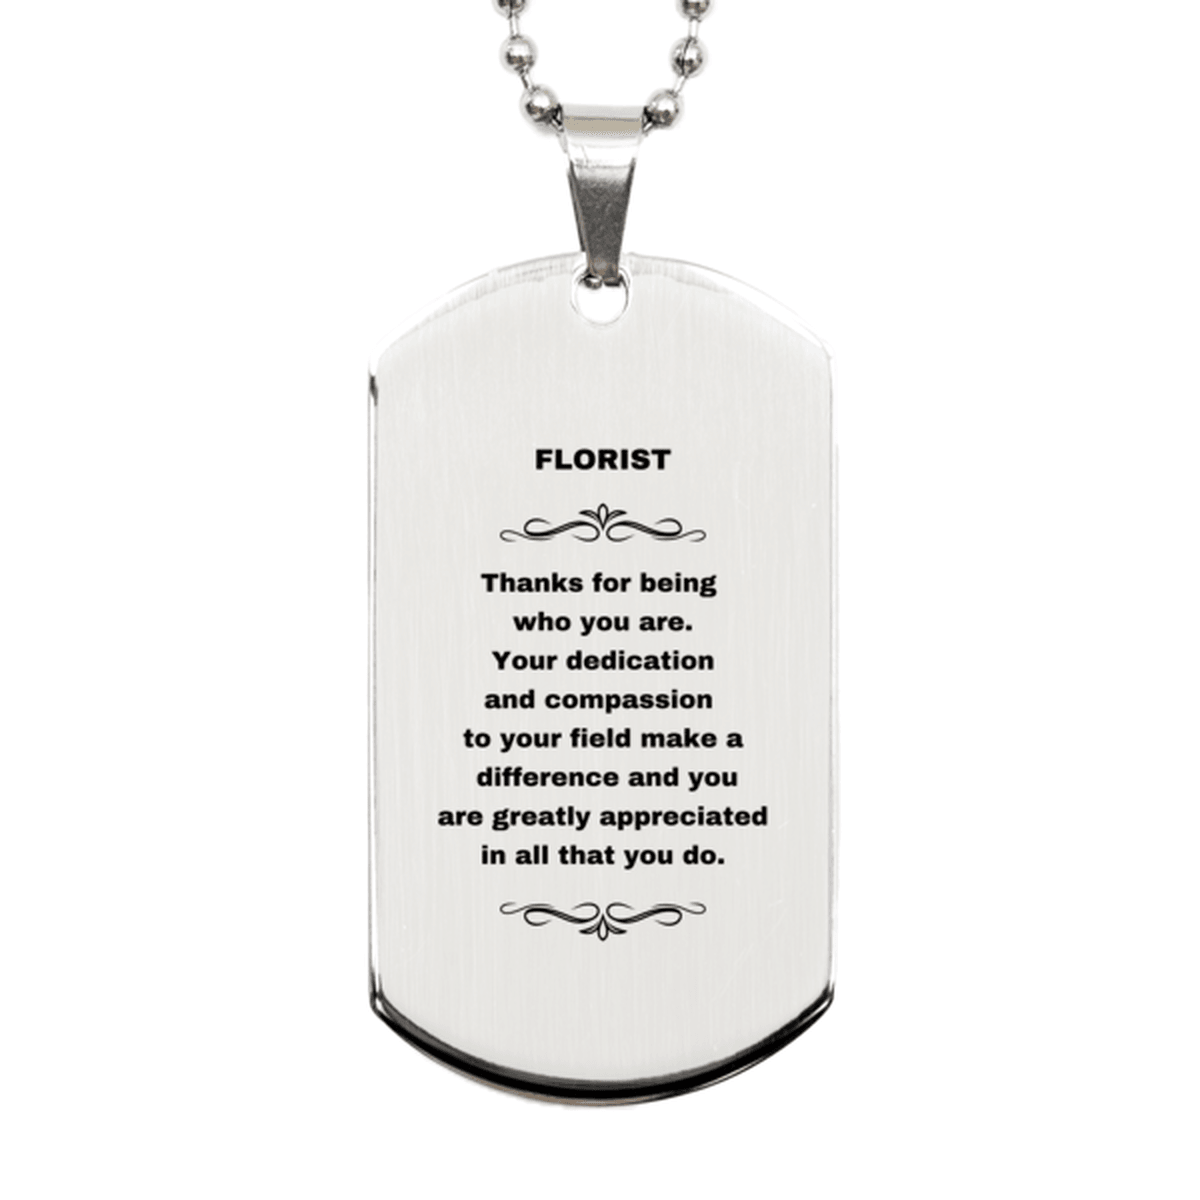 Florist Silver Dog Tag Necklace Engraved Bracelet - Thanks for being who you are - Birthday Christmas Jewelry Gifts Coworkers Colleague Boss - Mallard Moon Gift Shop